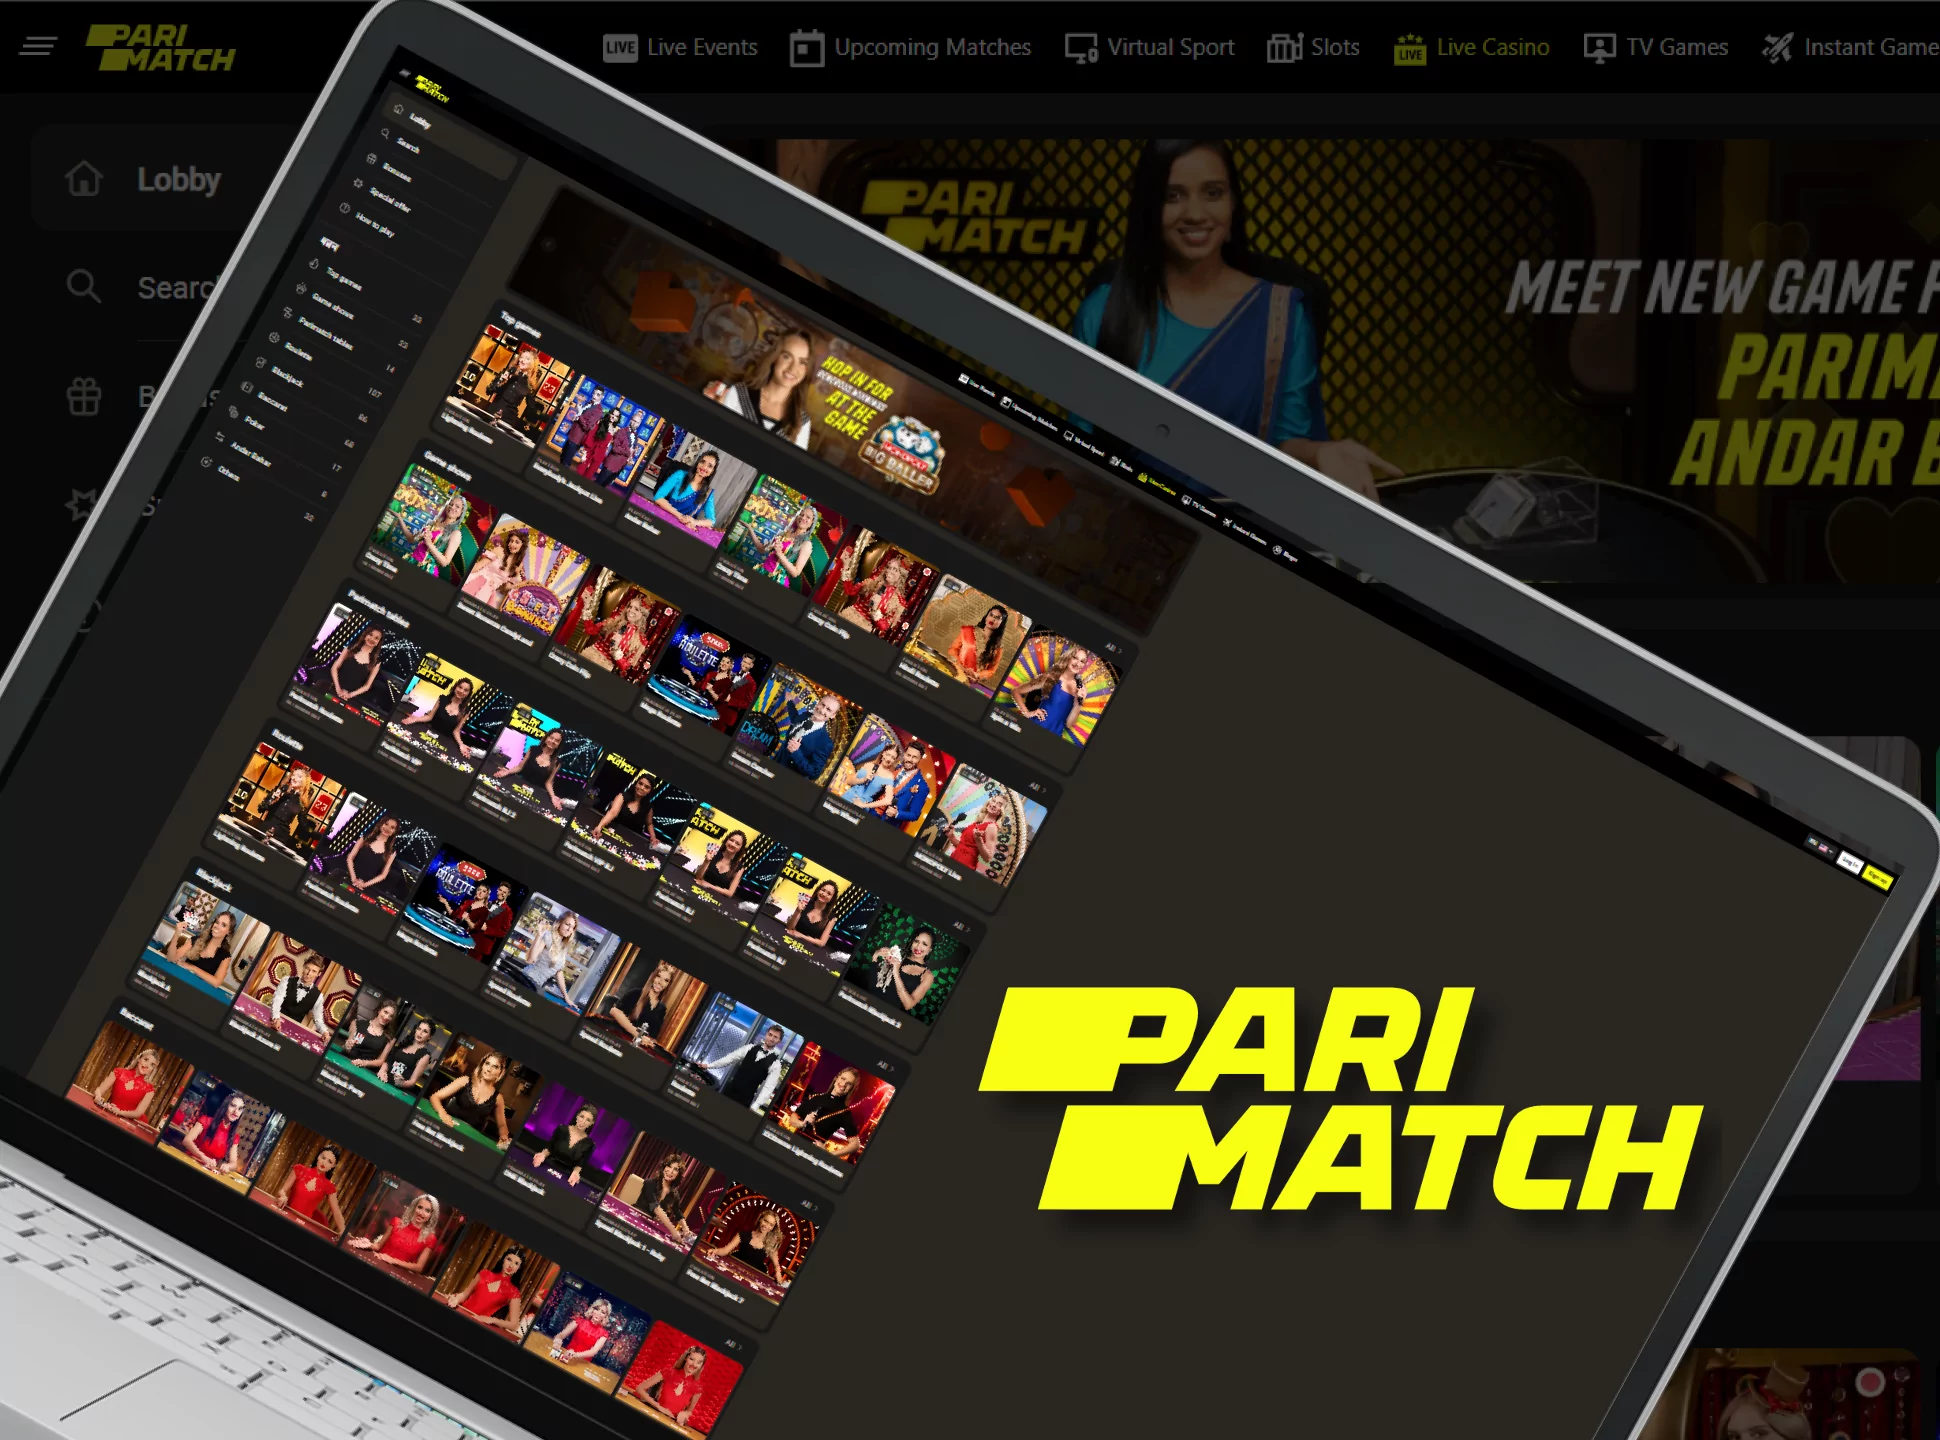 Parimatch online casino offers a lot of live games.